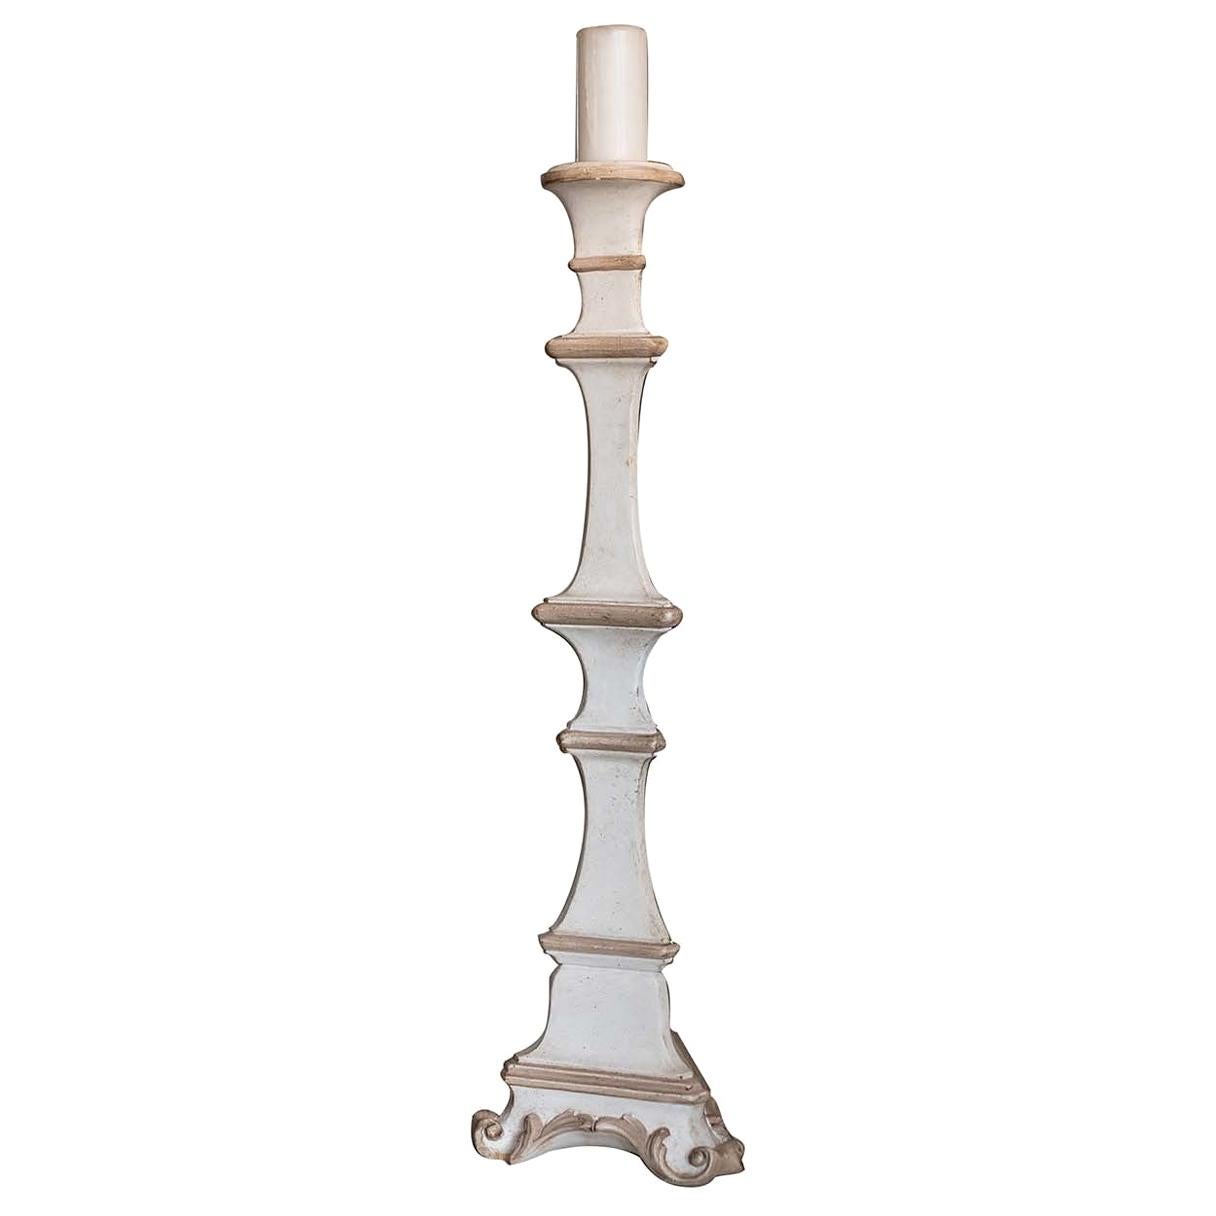 Gubbio candle holder in white wood